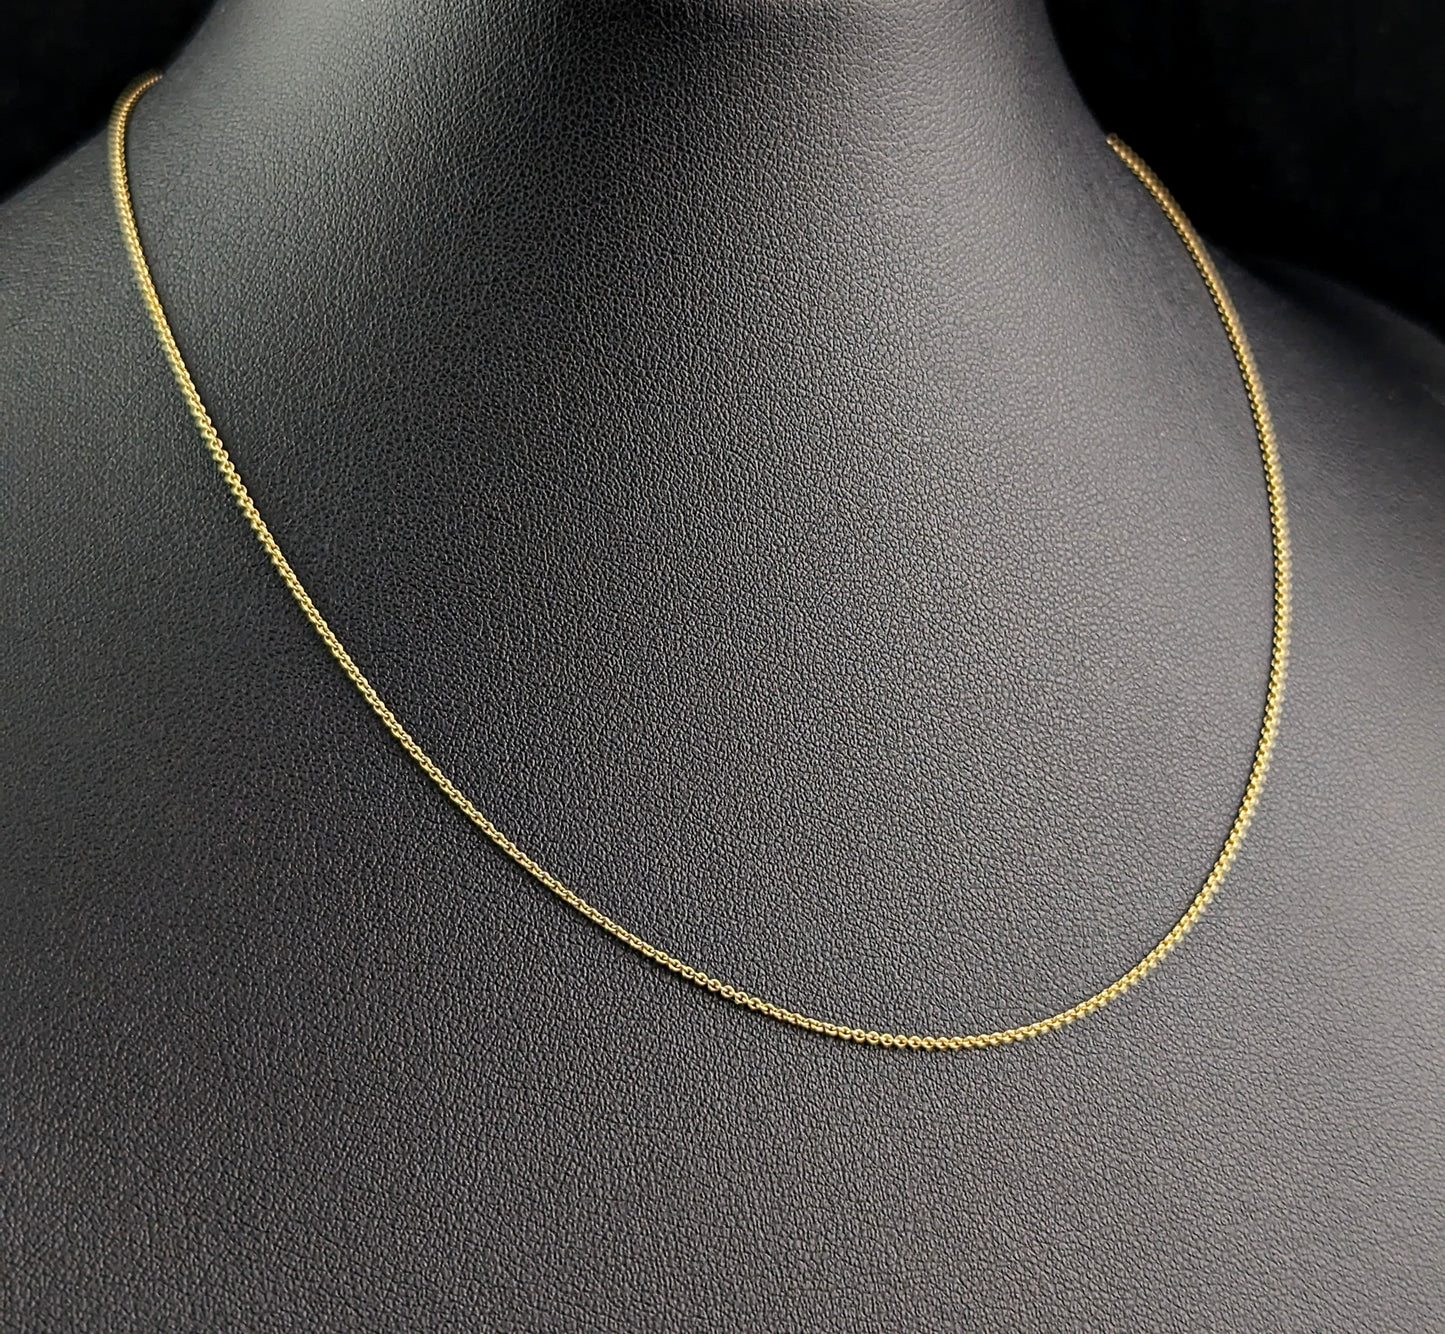 Antique 15ct gold trace link chain necklace, Edwardian, dainty